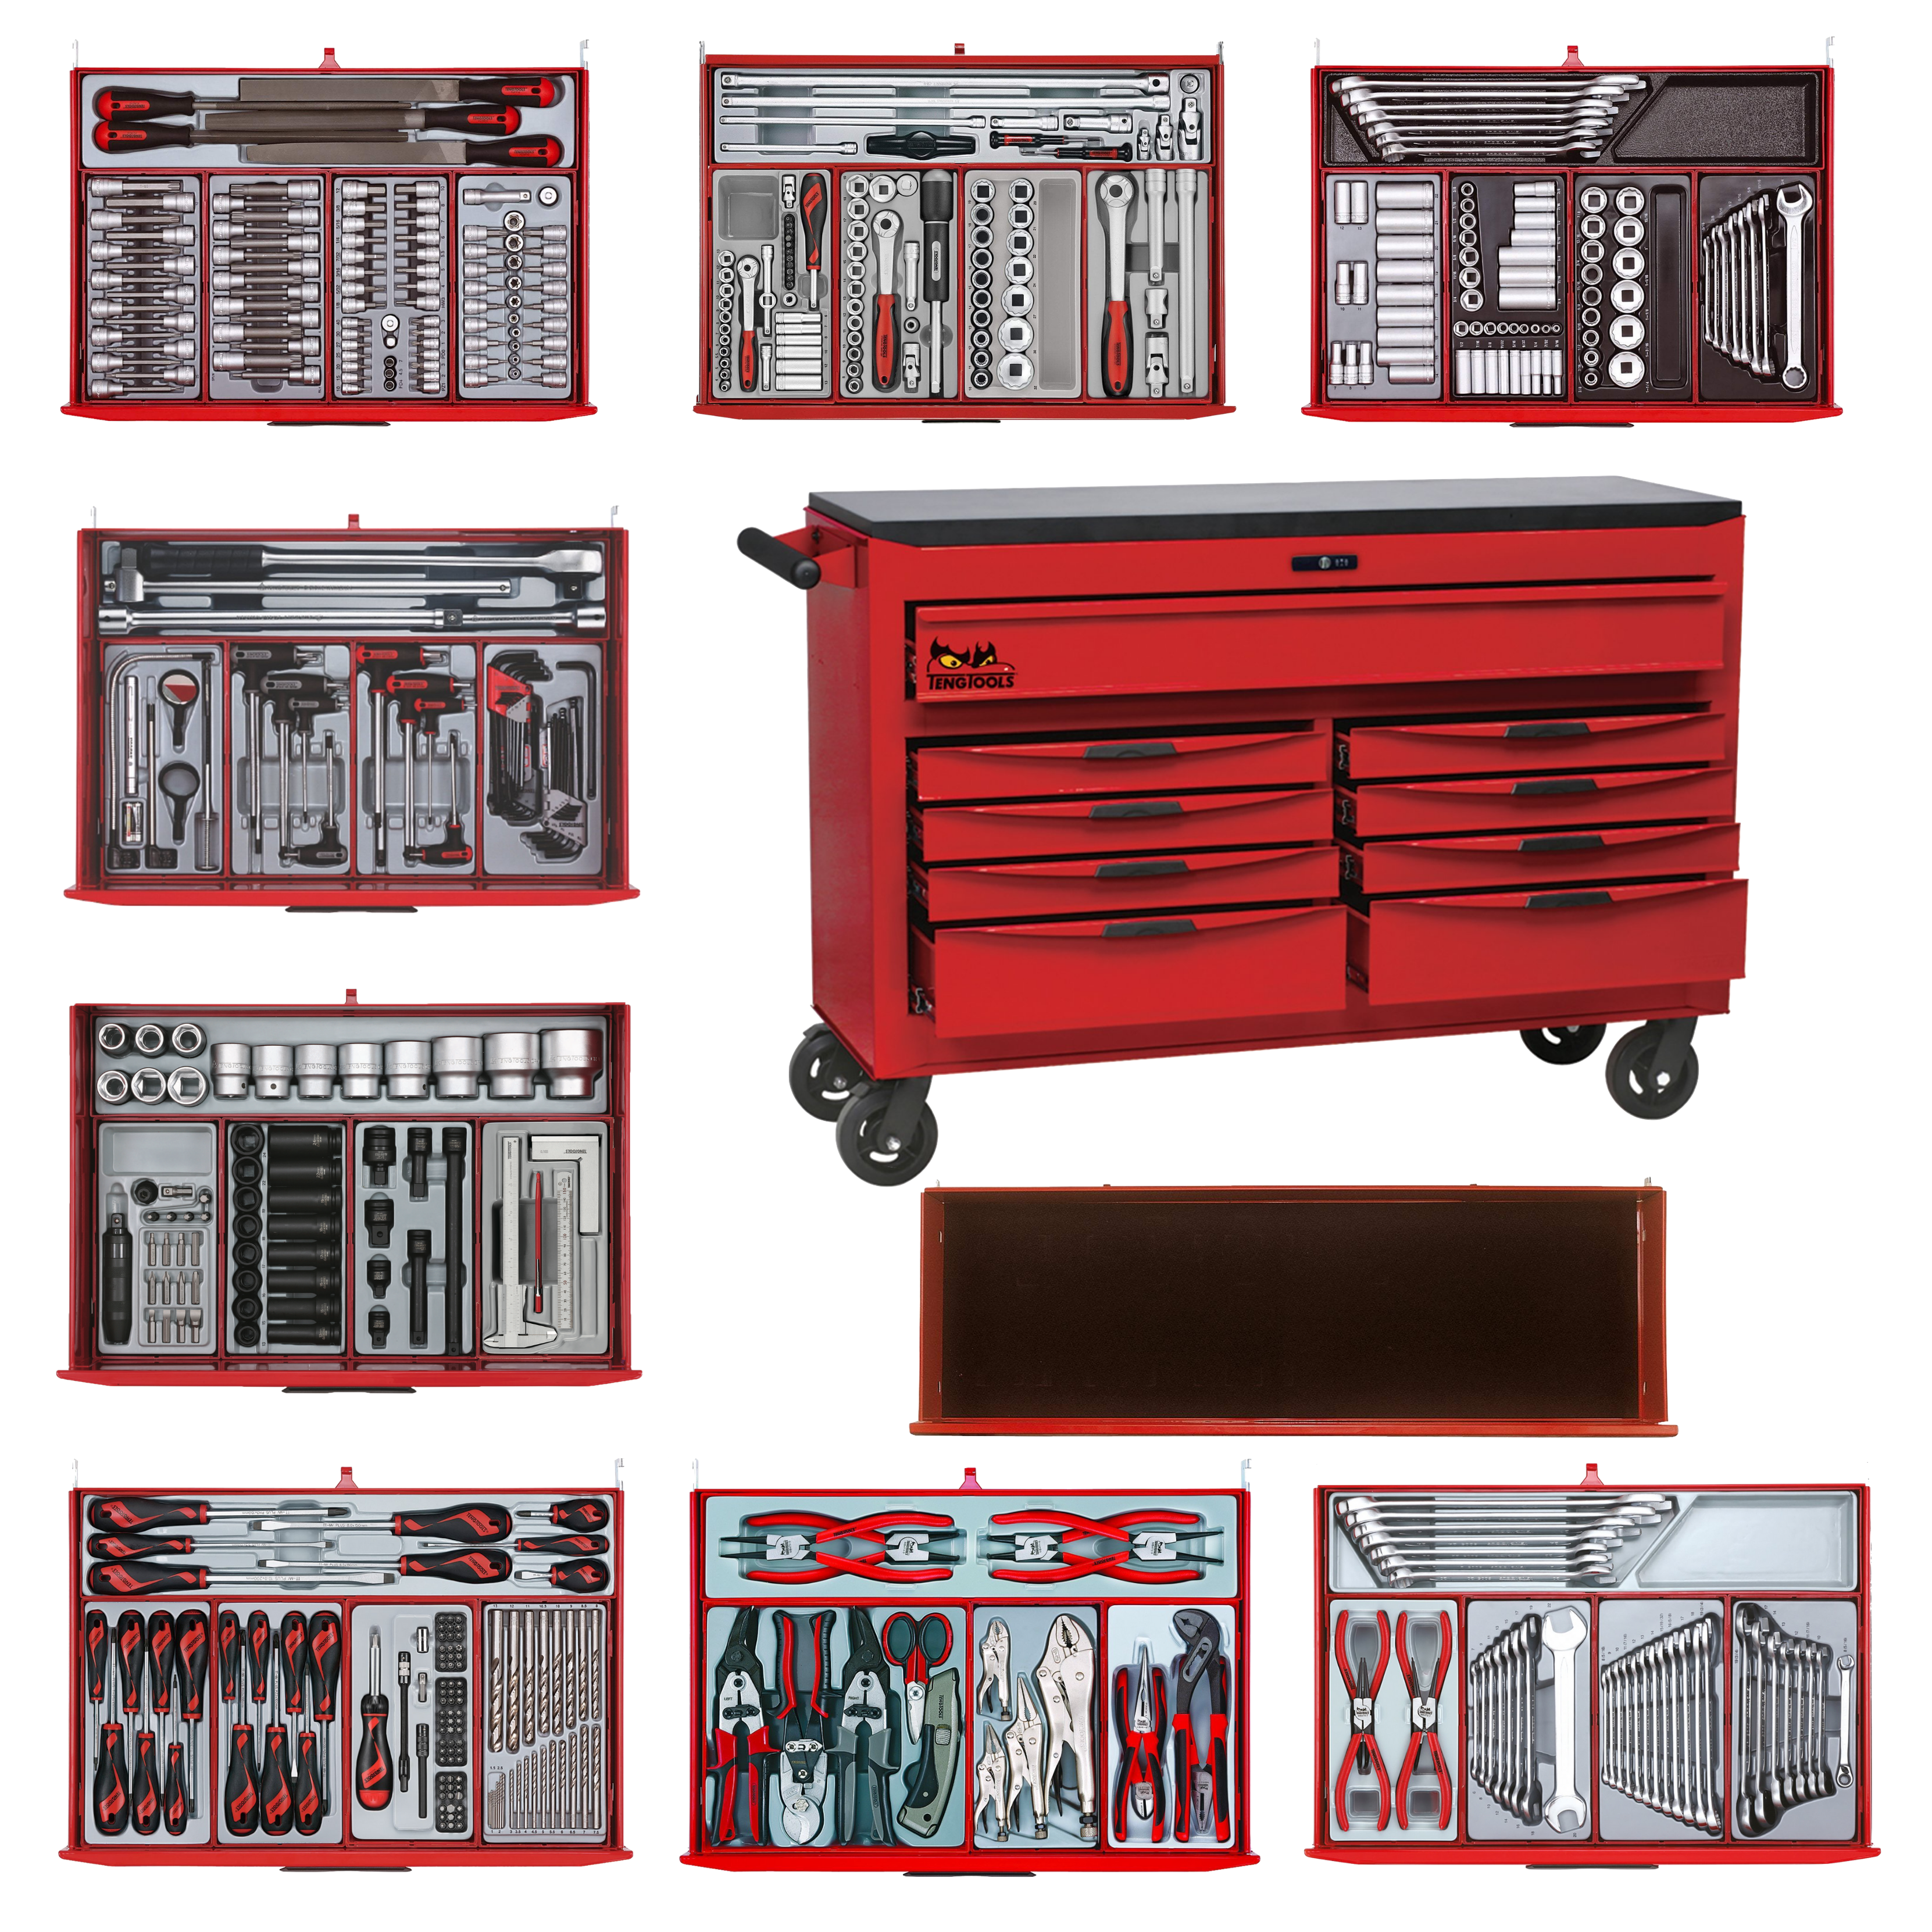 Teng Tools 569 Piece Complete Mixed Mega Master Hand Tool Kit With 53 Inch Wide Roller - TCMMIND08